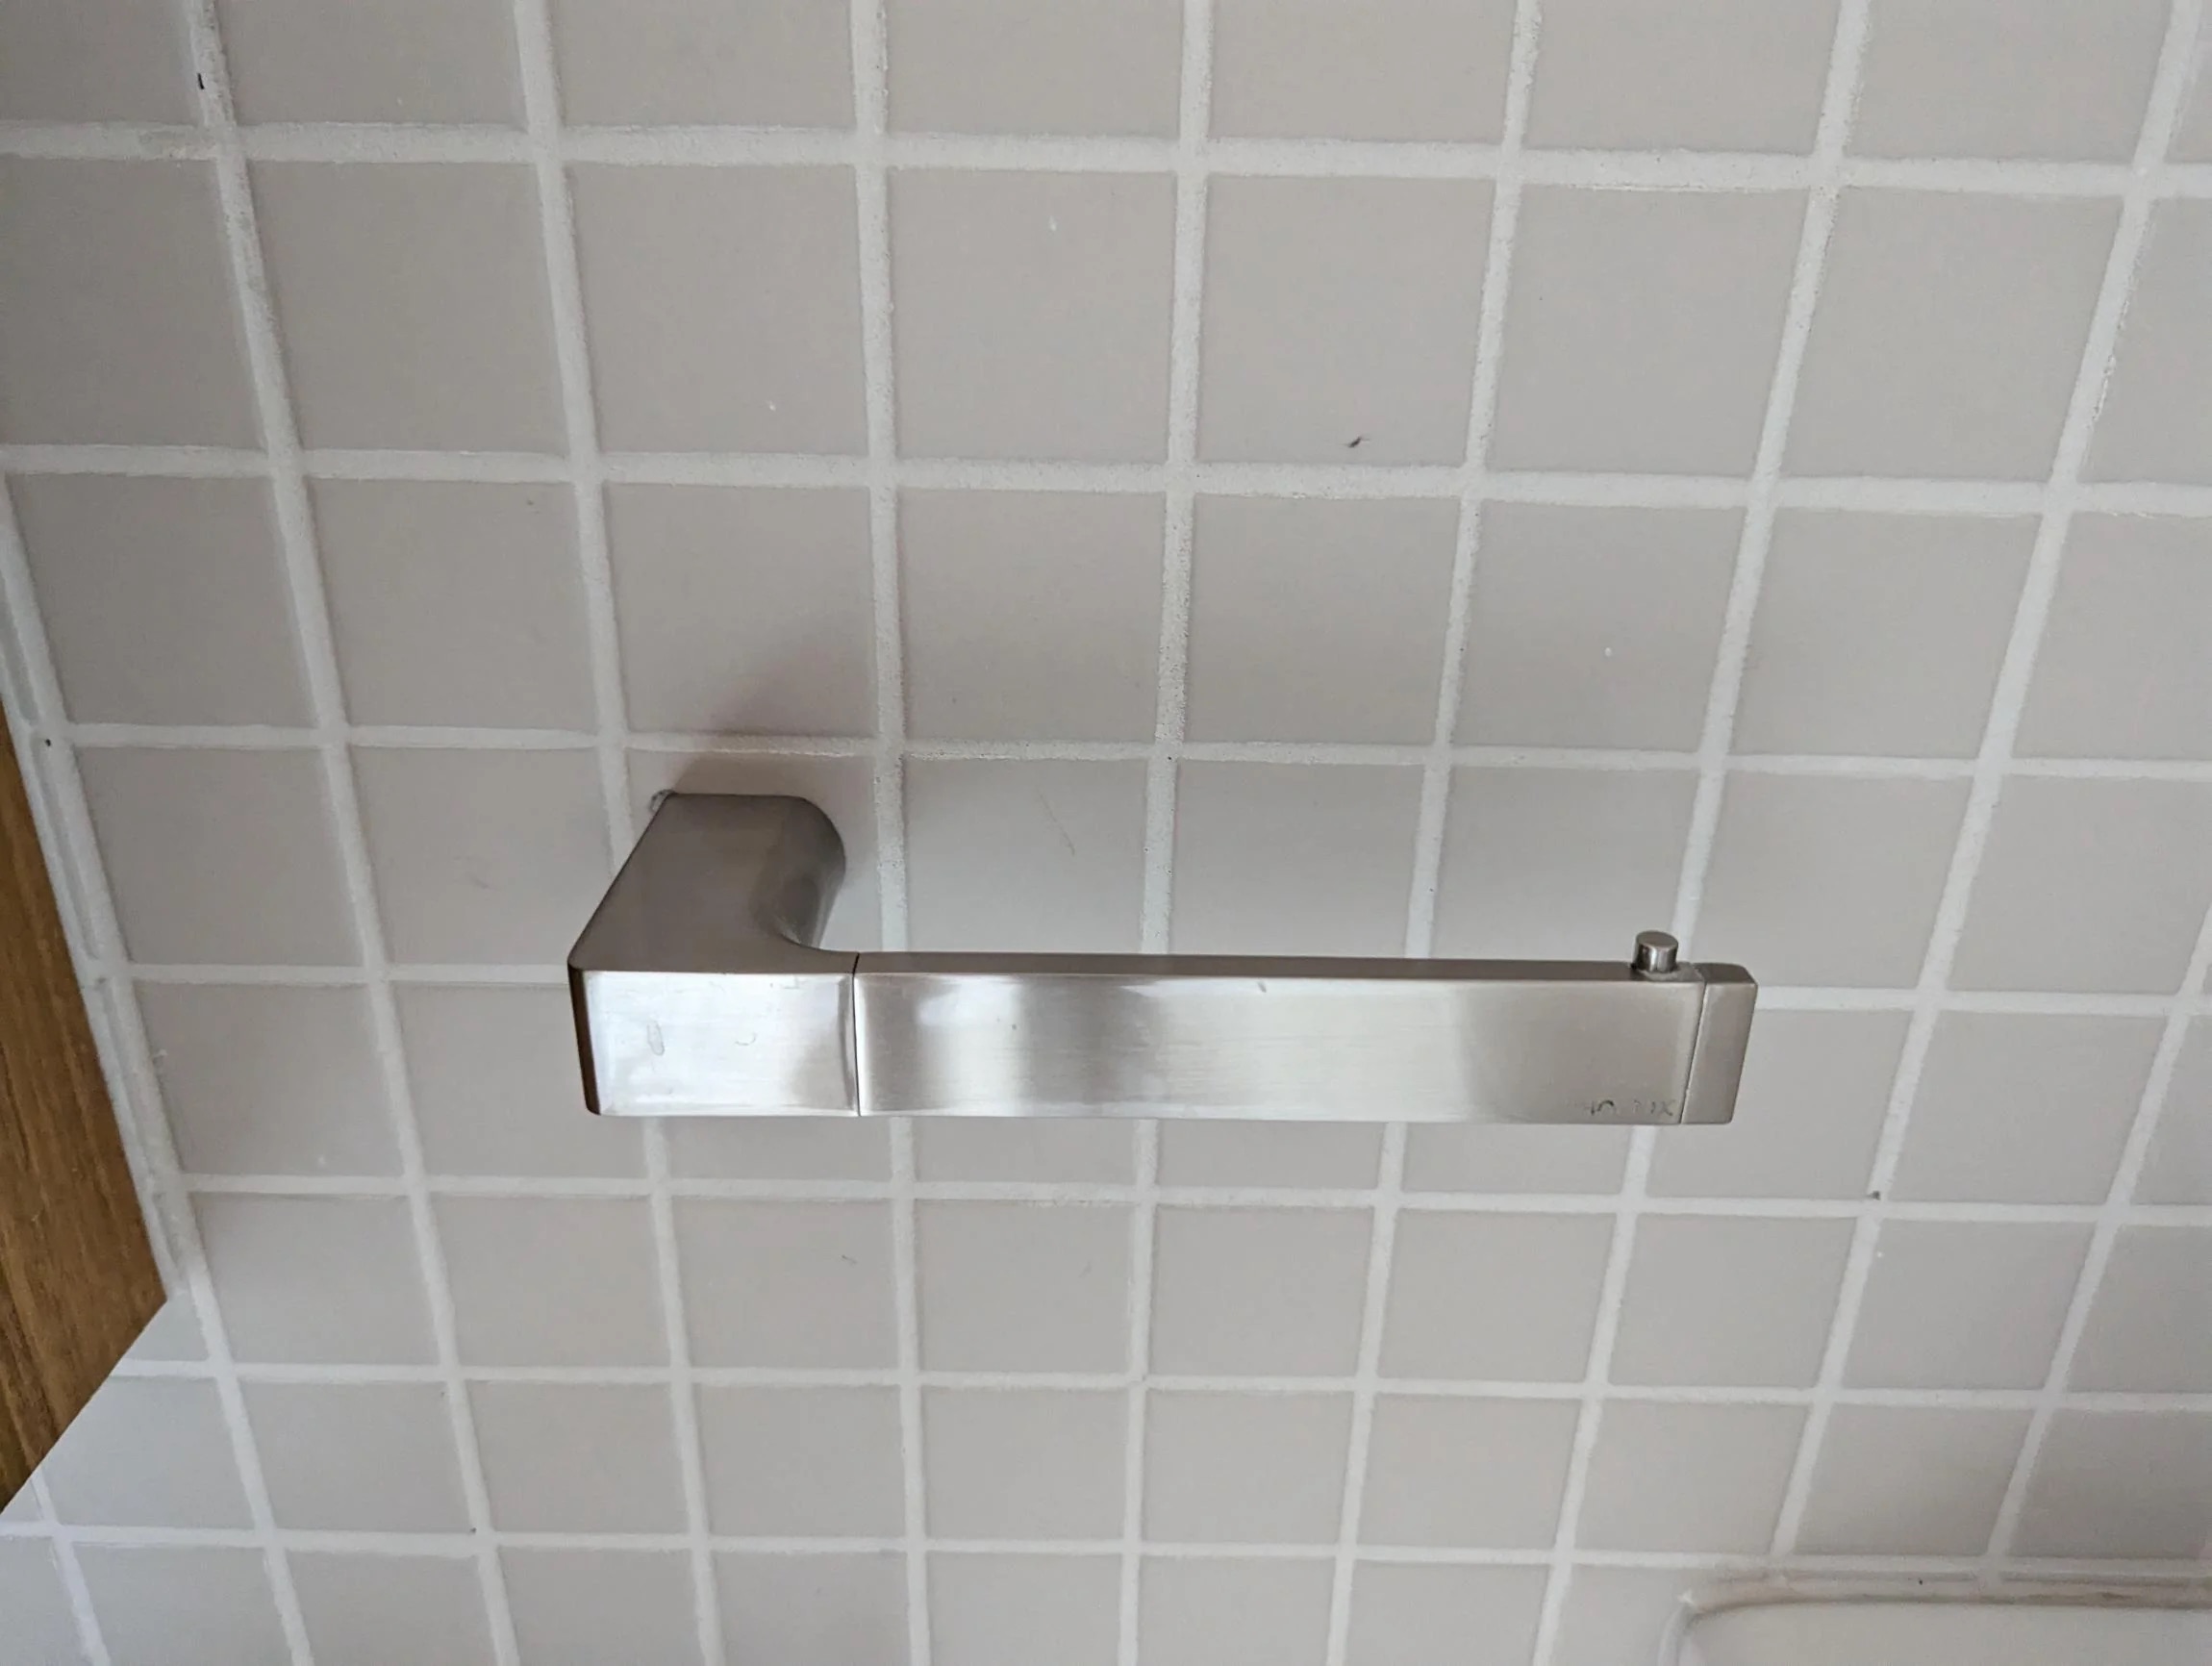 How To Remove A Toilet Paper Holder If The Set Screw Is Stripped